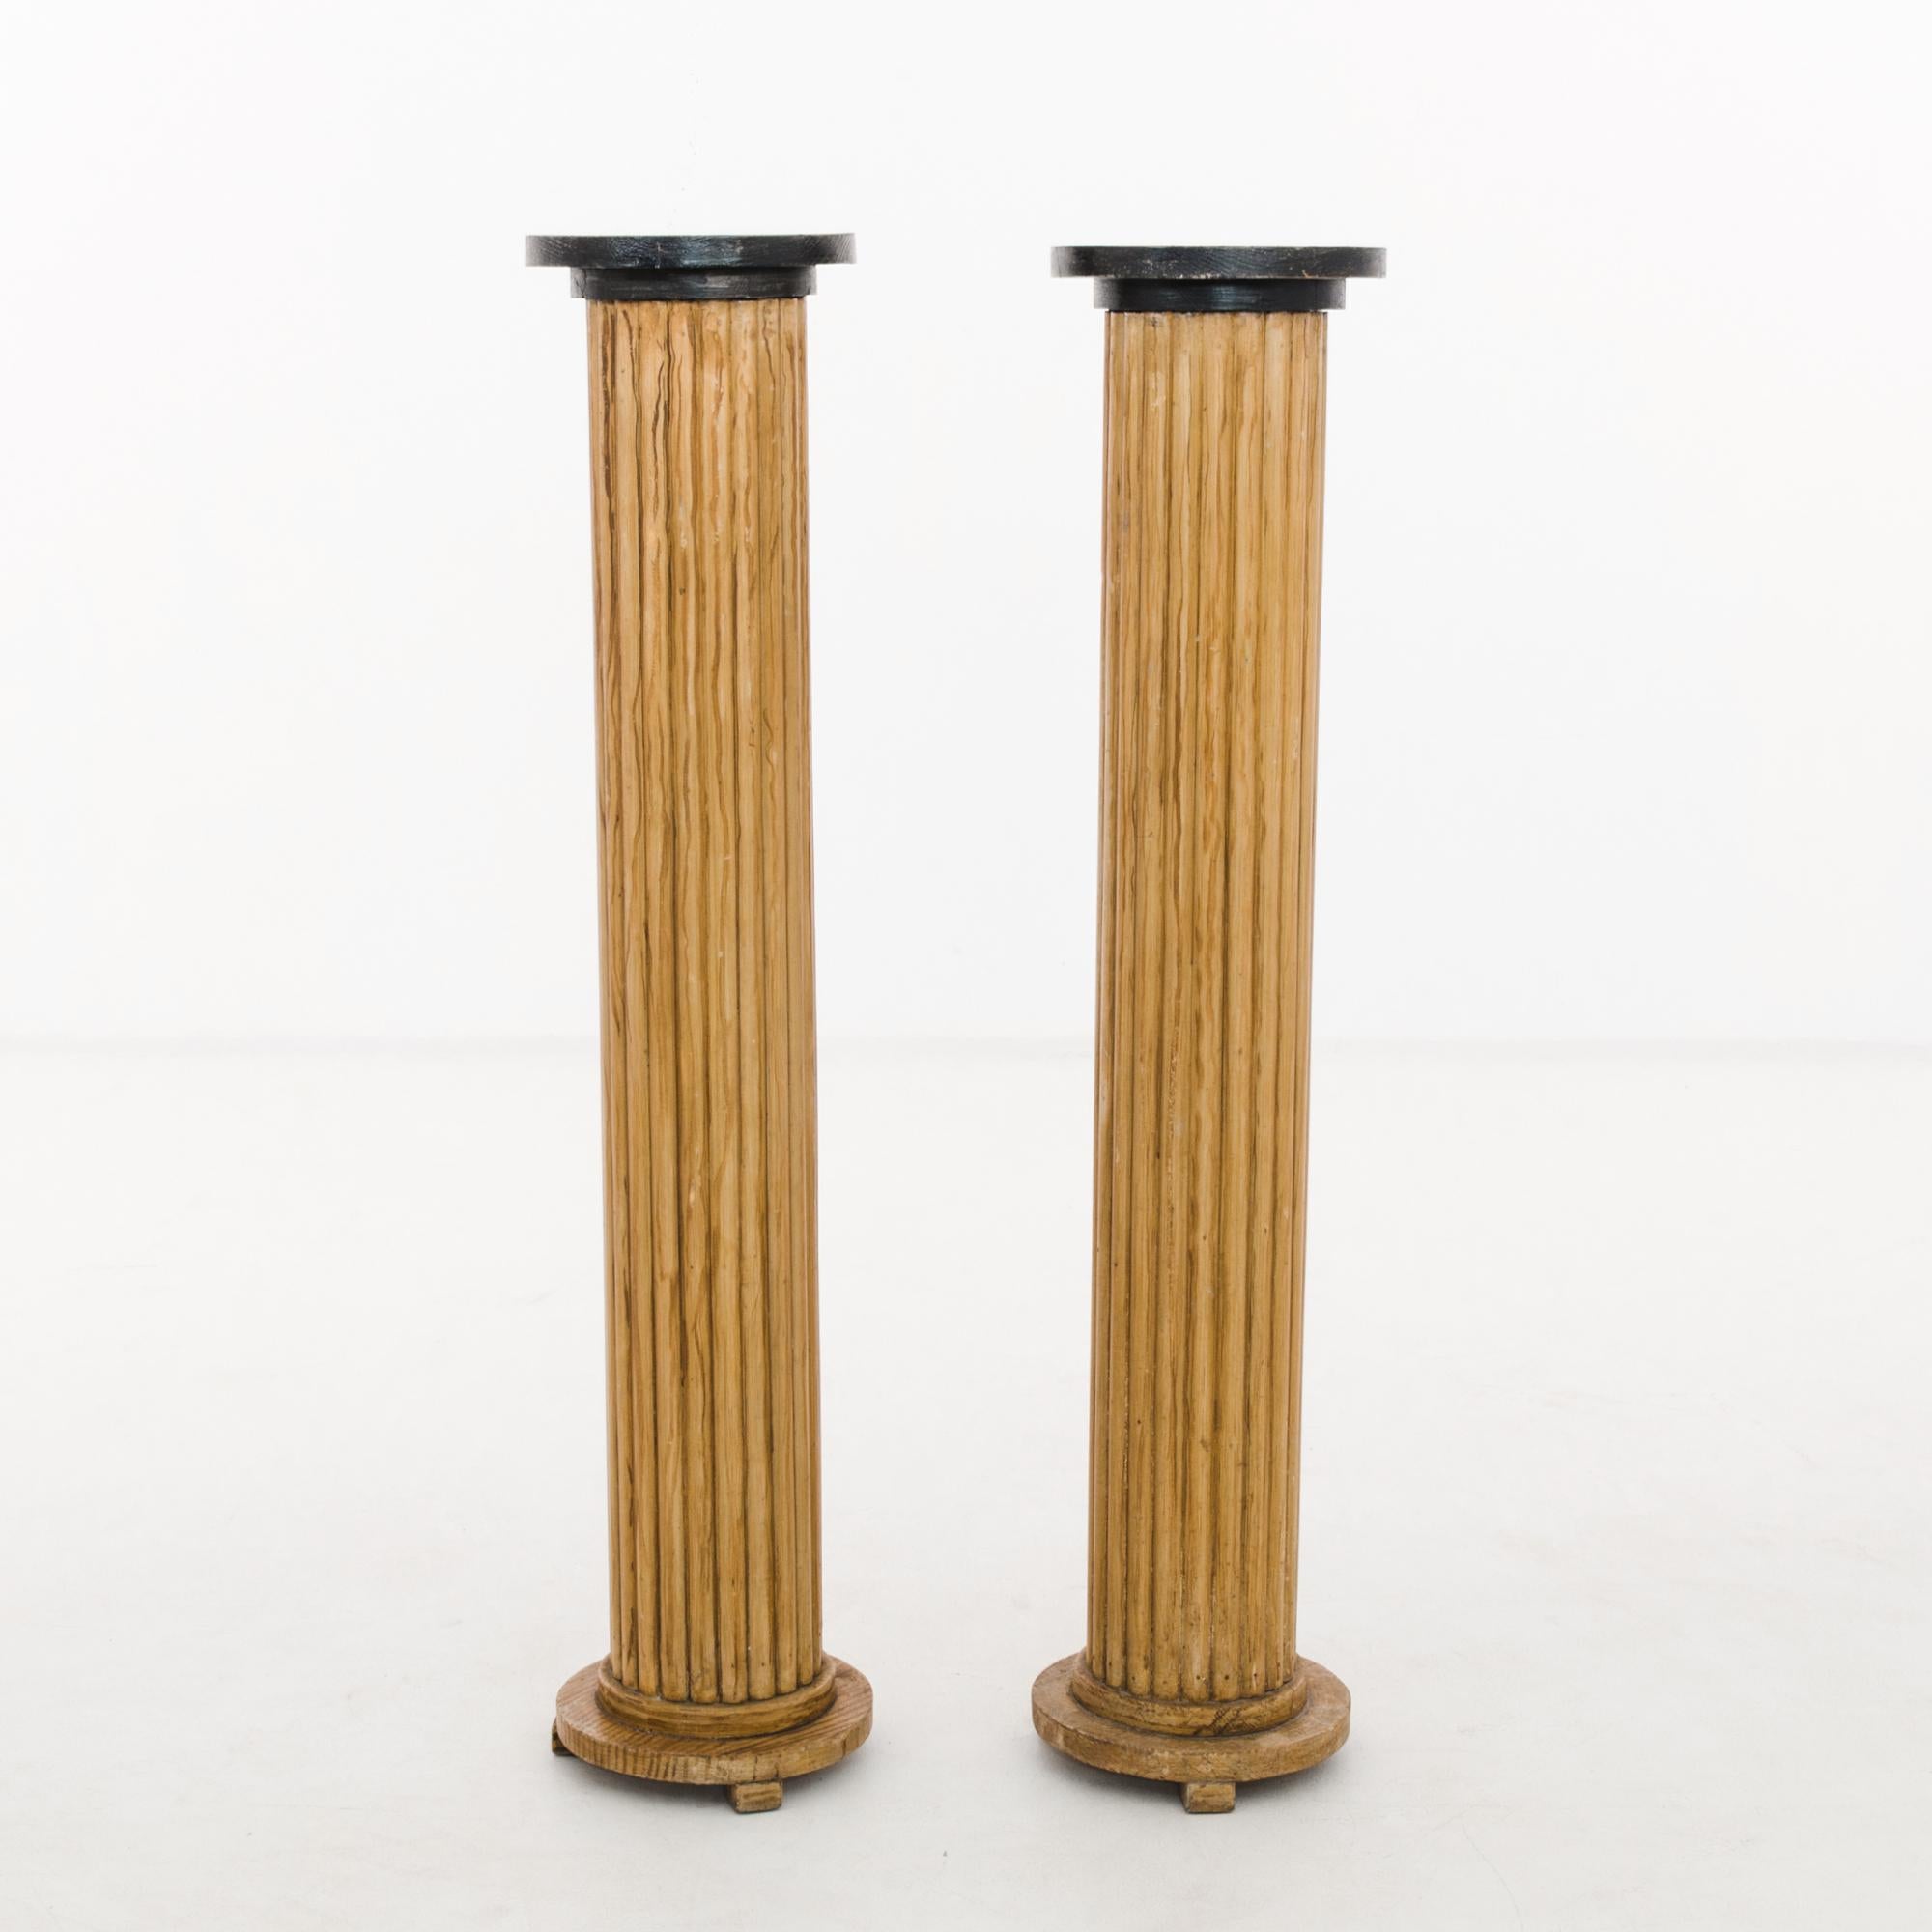 A pair of wooden pedestals from France, produced circa 1920. This pair is a set of freestanding doric columns, set upon three toe bases, wearing permanent black caps. At four feet in height, once this duo is installed, they form a kind of gate,